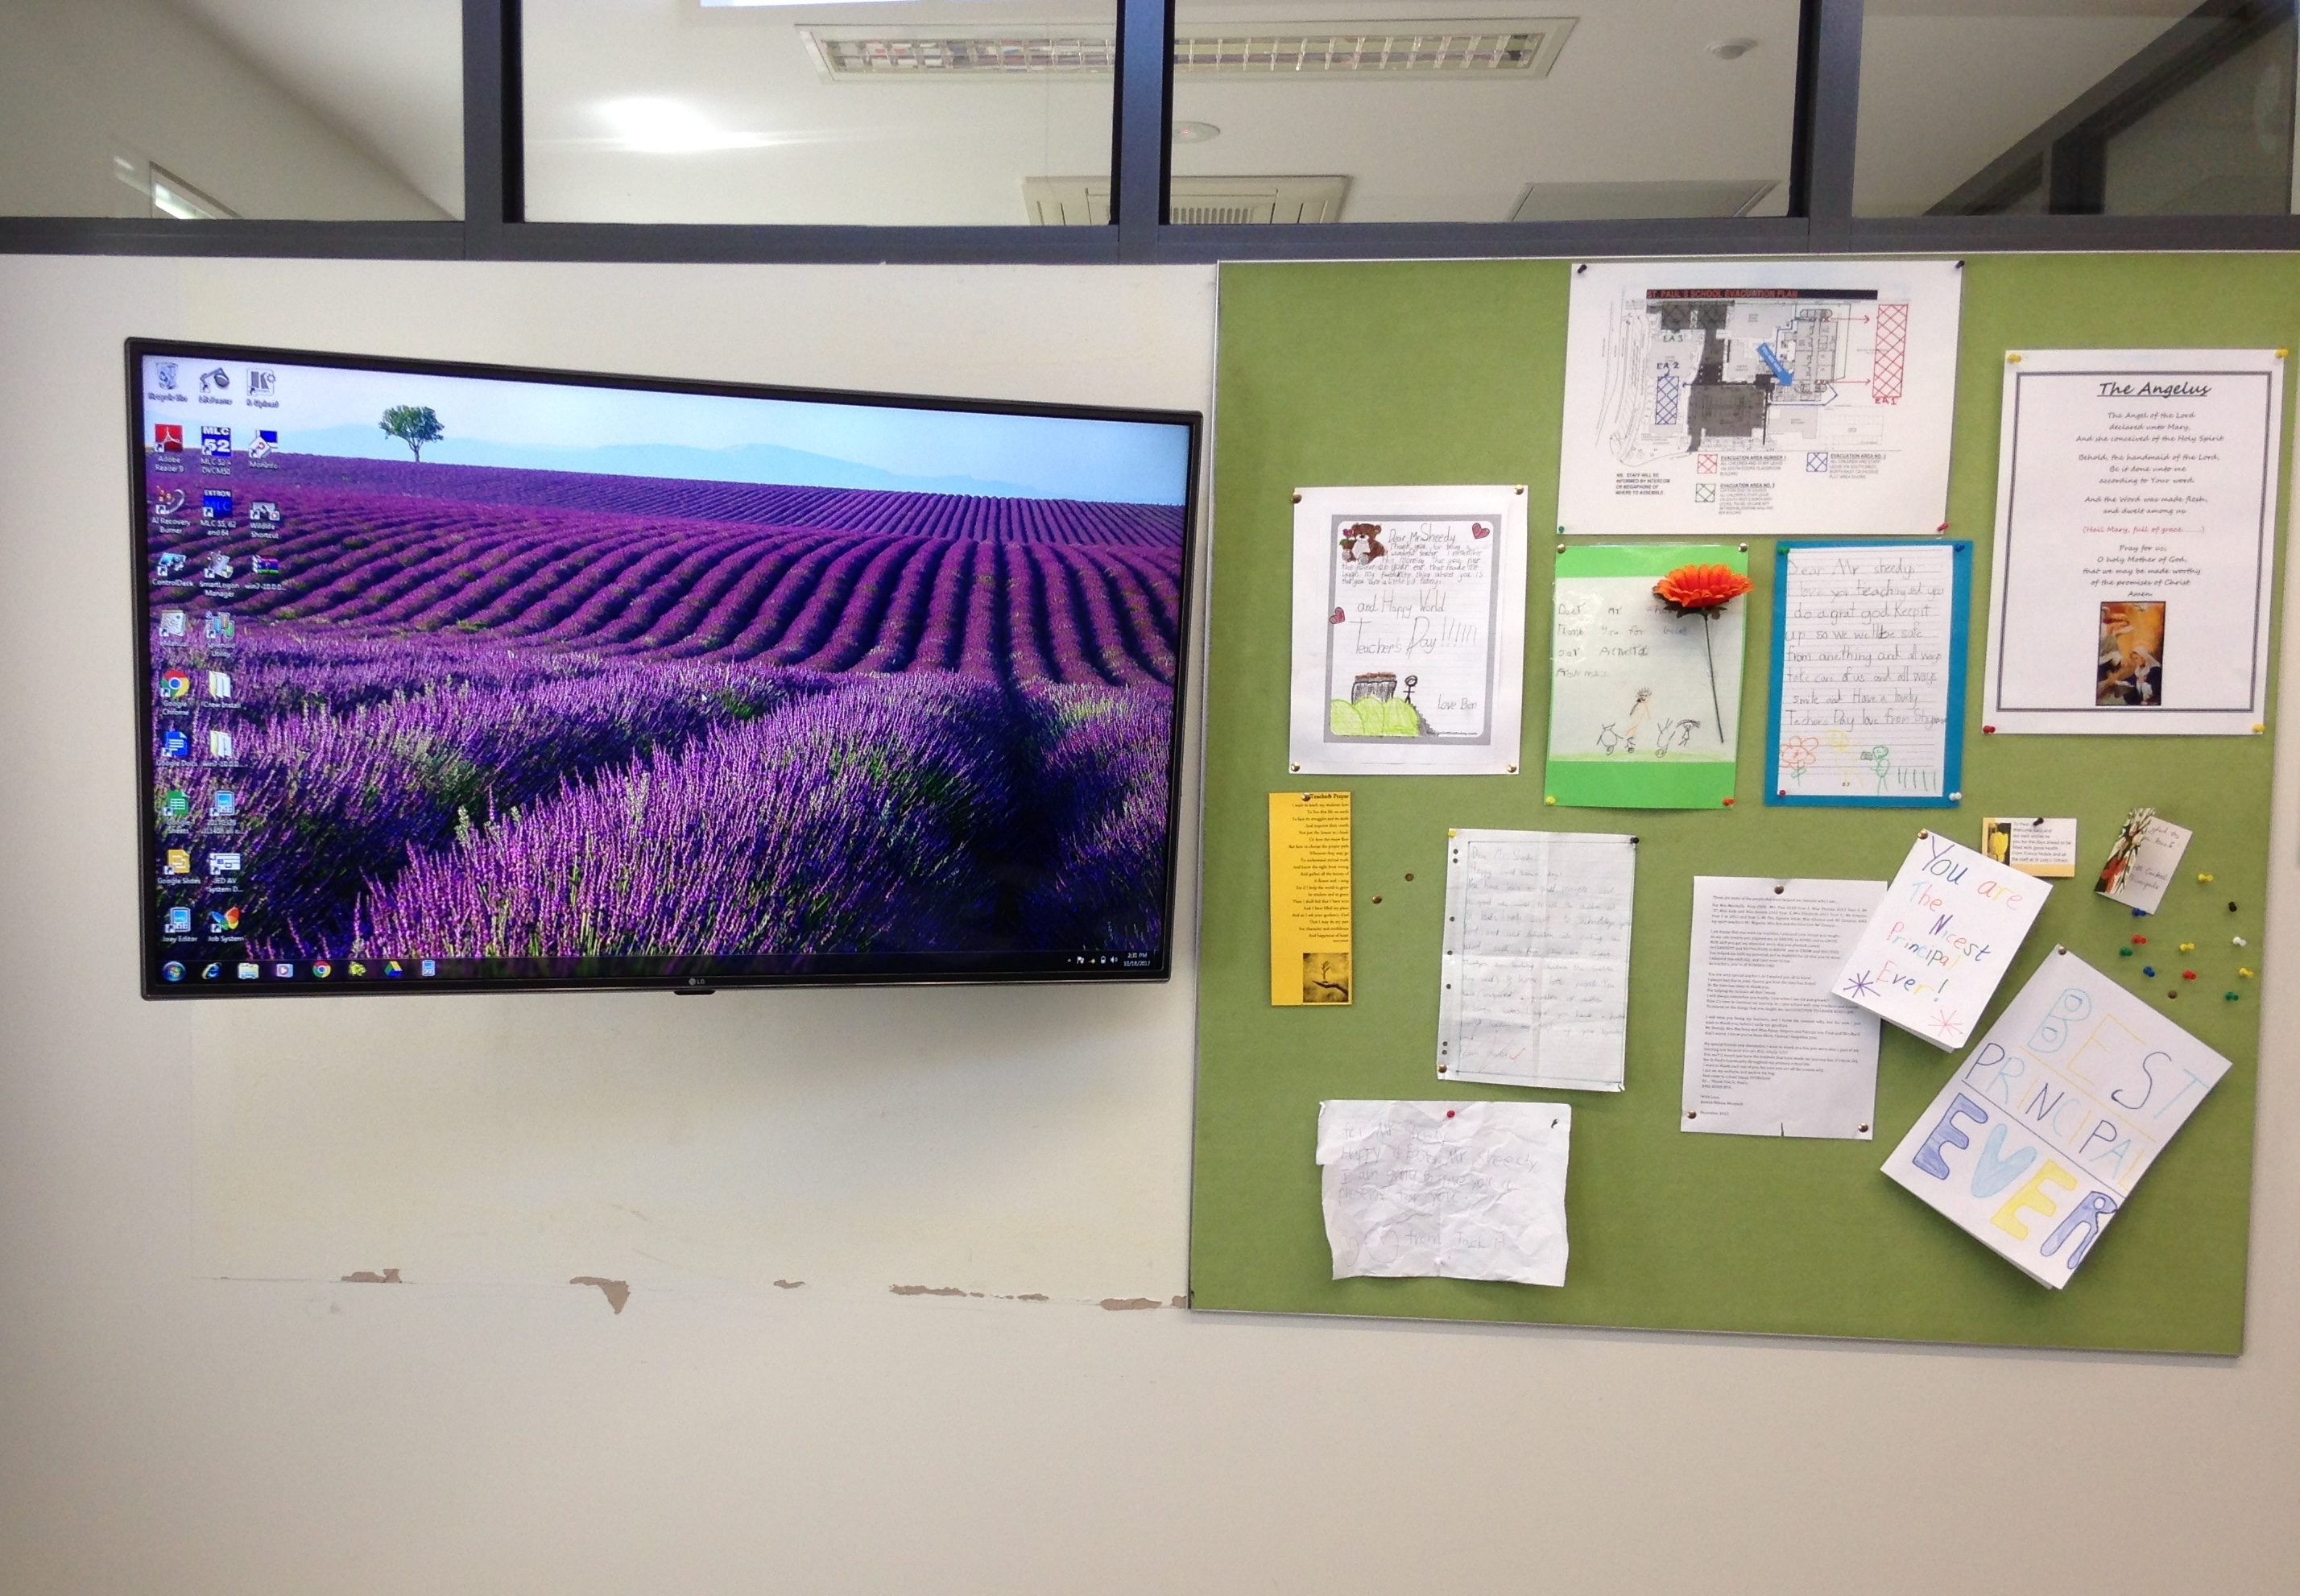 49" full HD LG Commercial Lite monitor at St Paul's Primary School